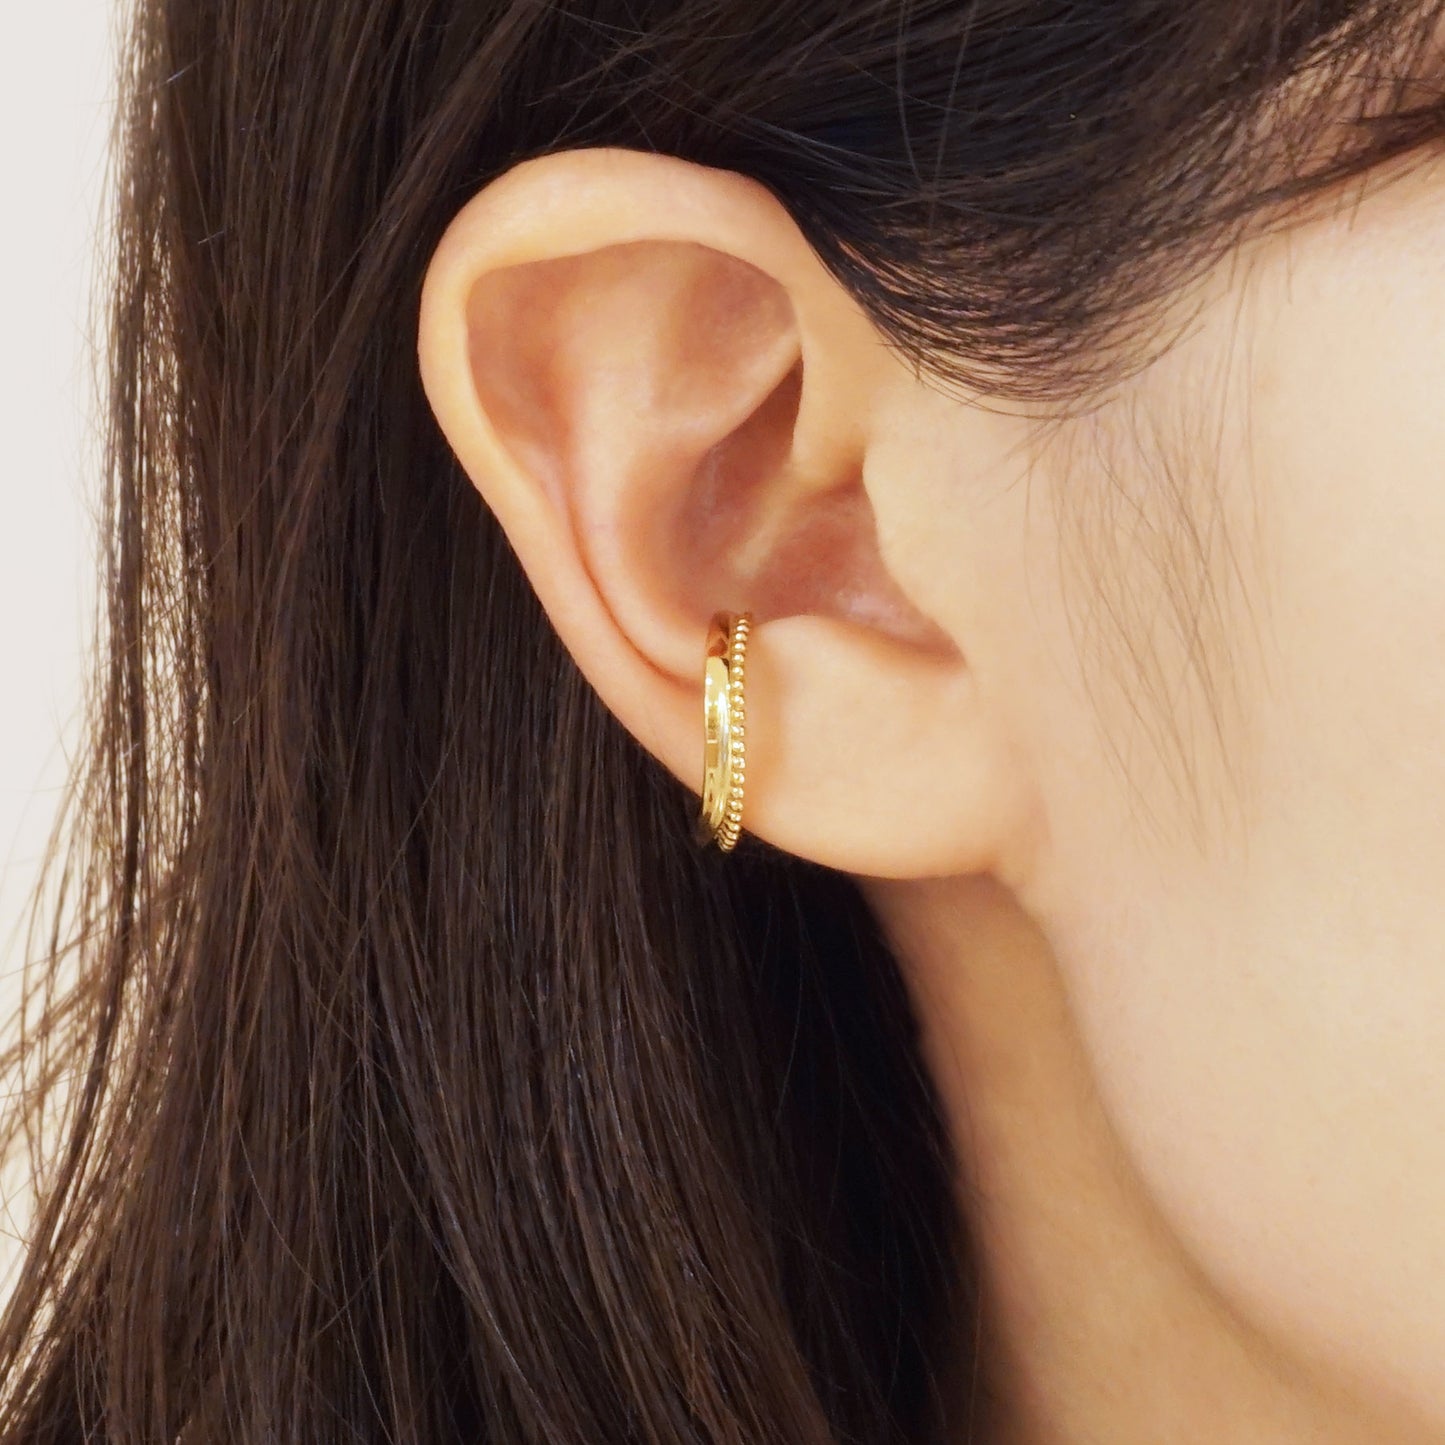 925 Sterling Silver Ear Cuff (Yellow Gold Plated) - Model Image